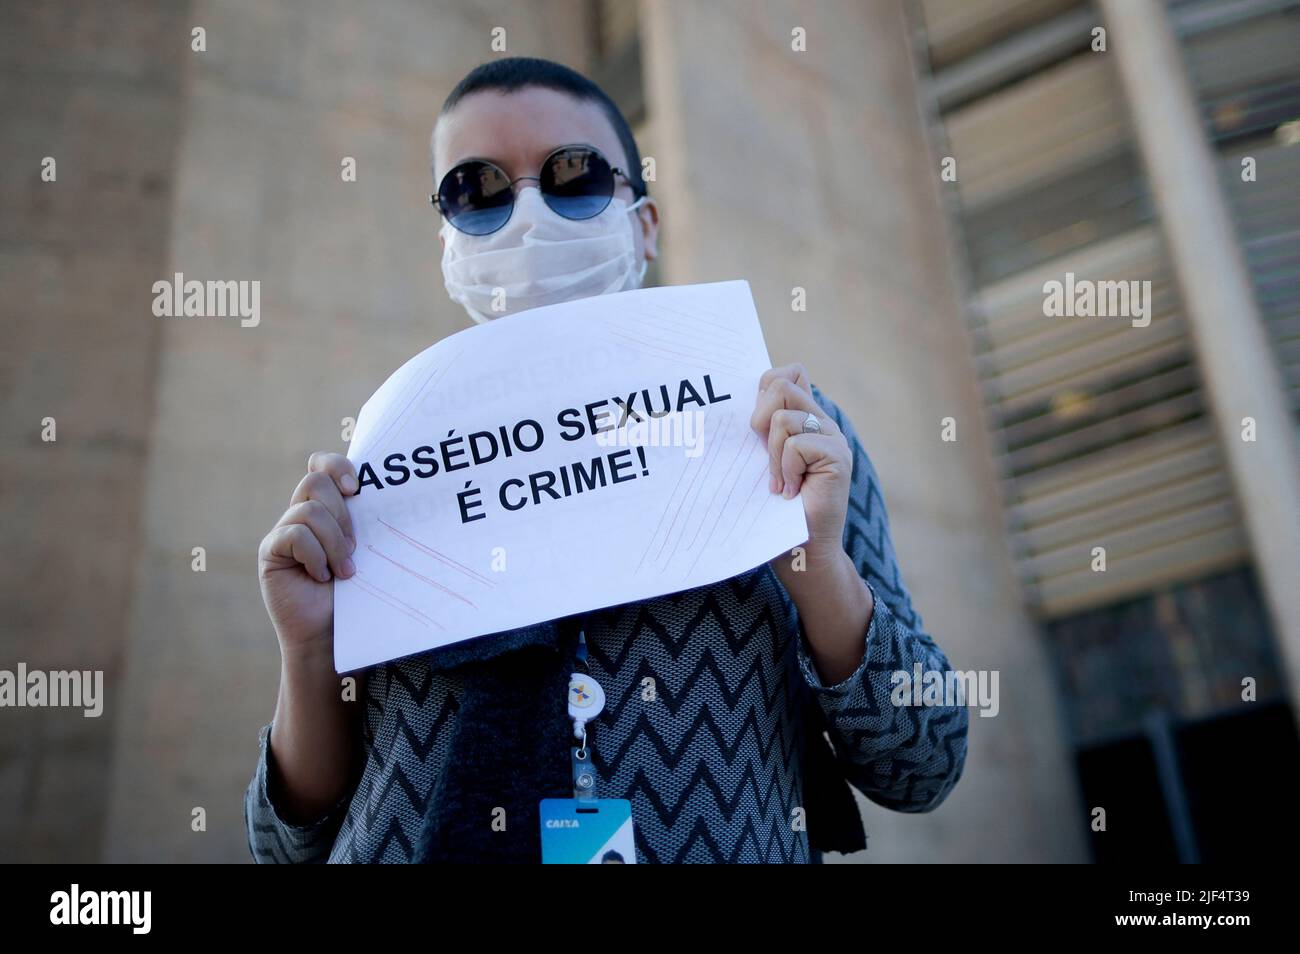 A employee of Caixa Economica Federal bank takes part in a protest against the bank's president Pedro Guimaraes after allegations of sexual harassment, outside the bank's headquarters in Brasilia, Brazil June 29, 2022. REUTERS/Ueslei Marcelino Stock Photo